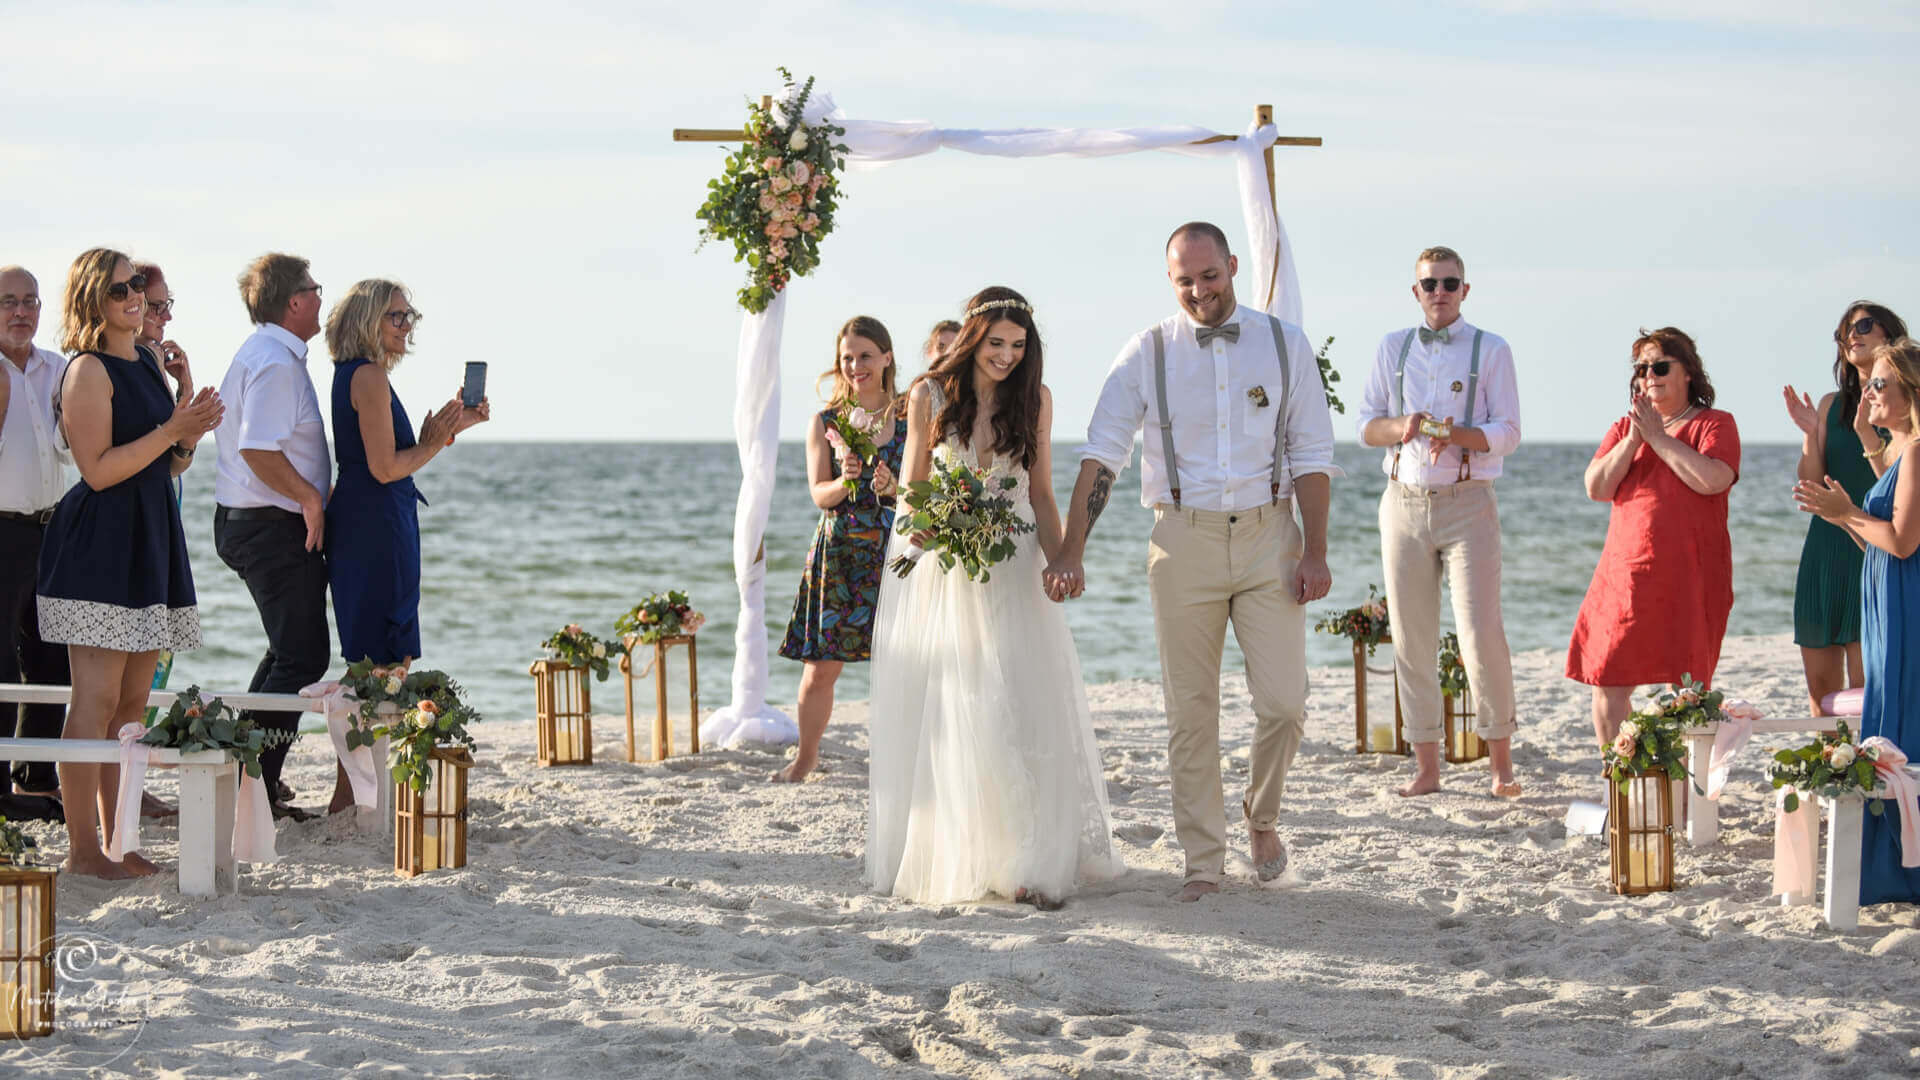 Florida beach wedding package showing couple walking down the aisle